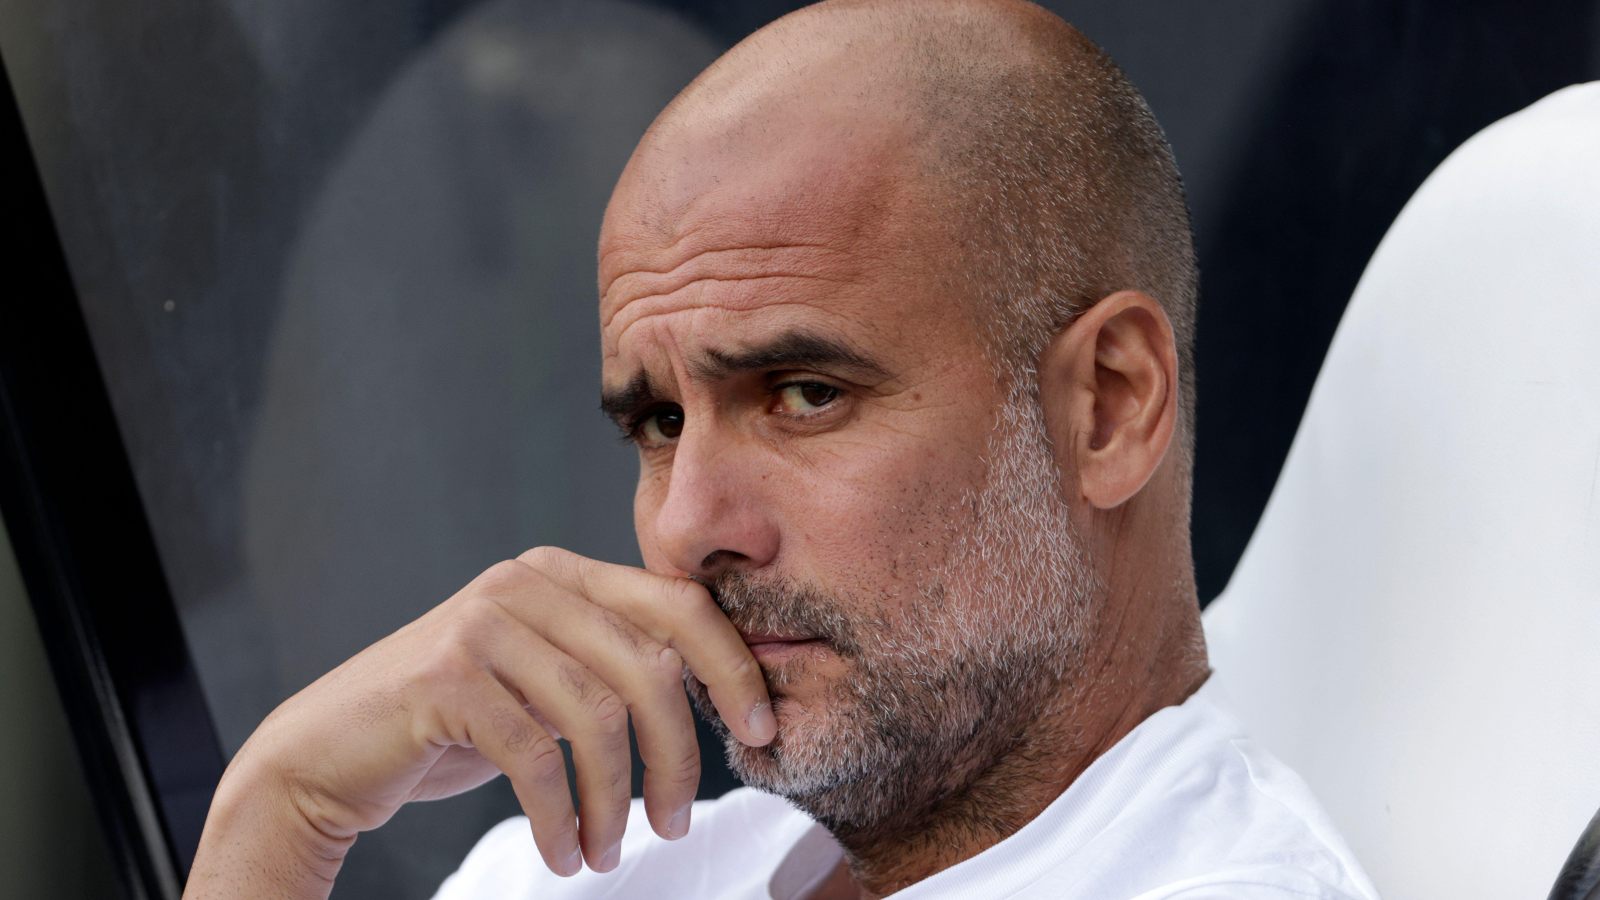 Pep Guardiola, above, had previously said he would leave Man City if he discovered the club’s hierarchy had “lied” about its finances. (Image: Getty)